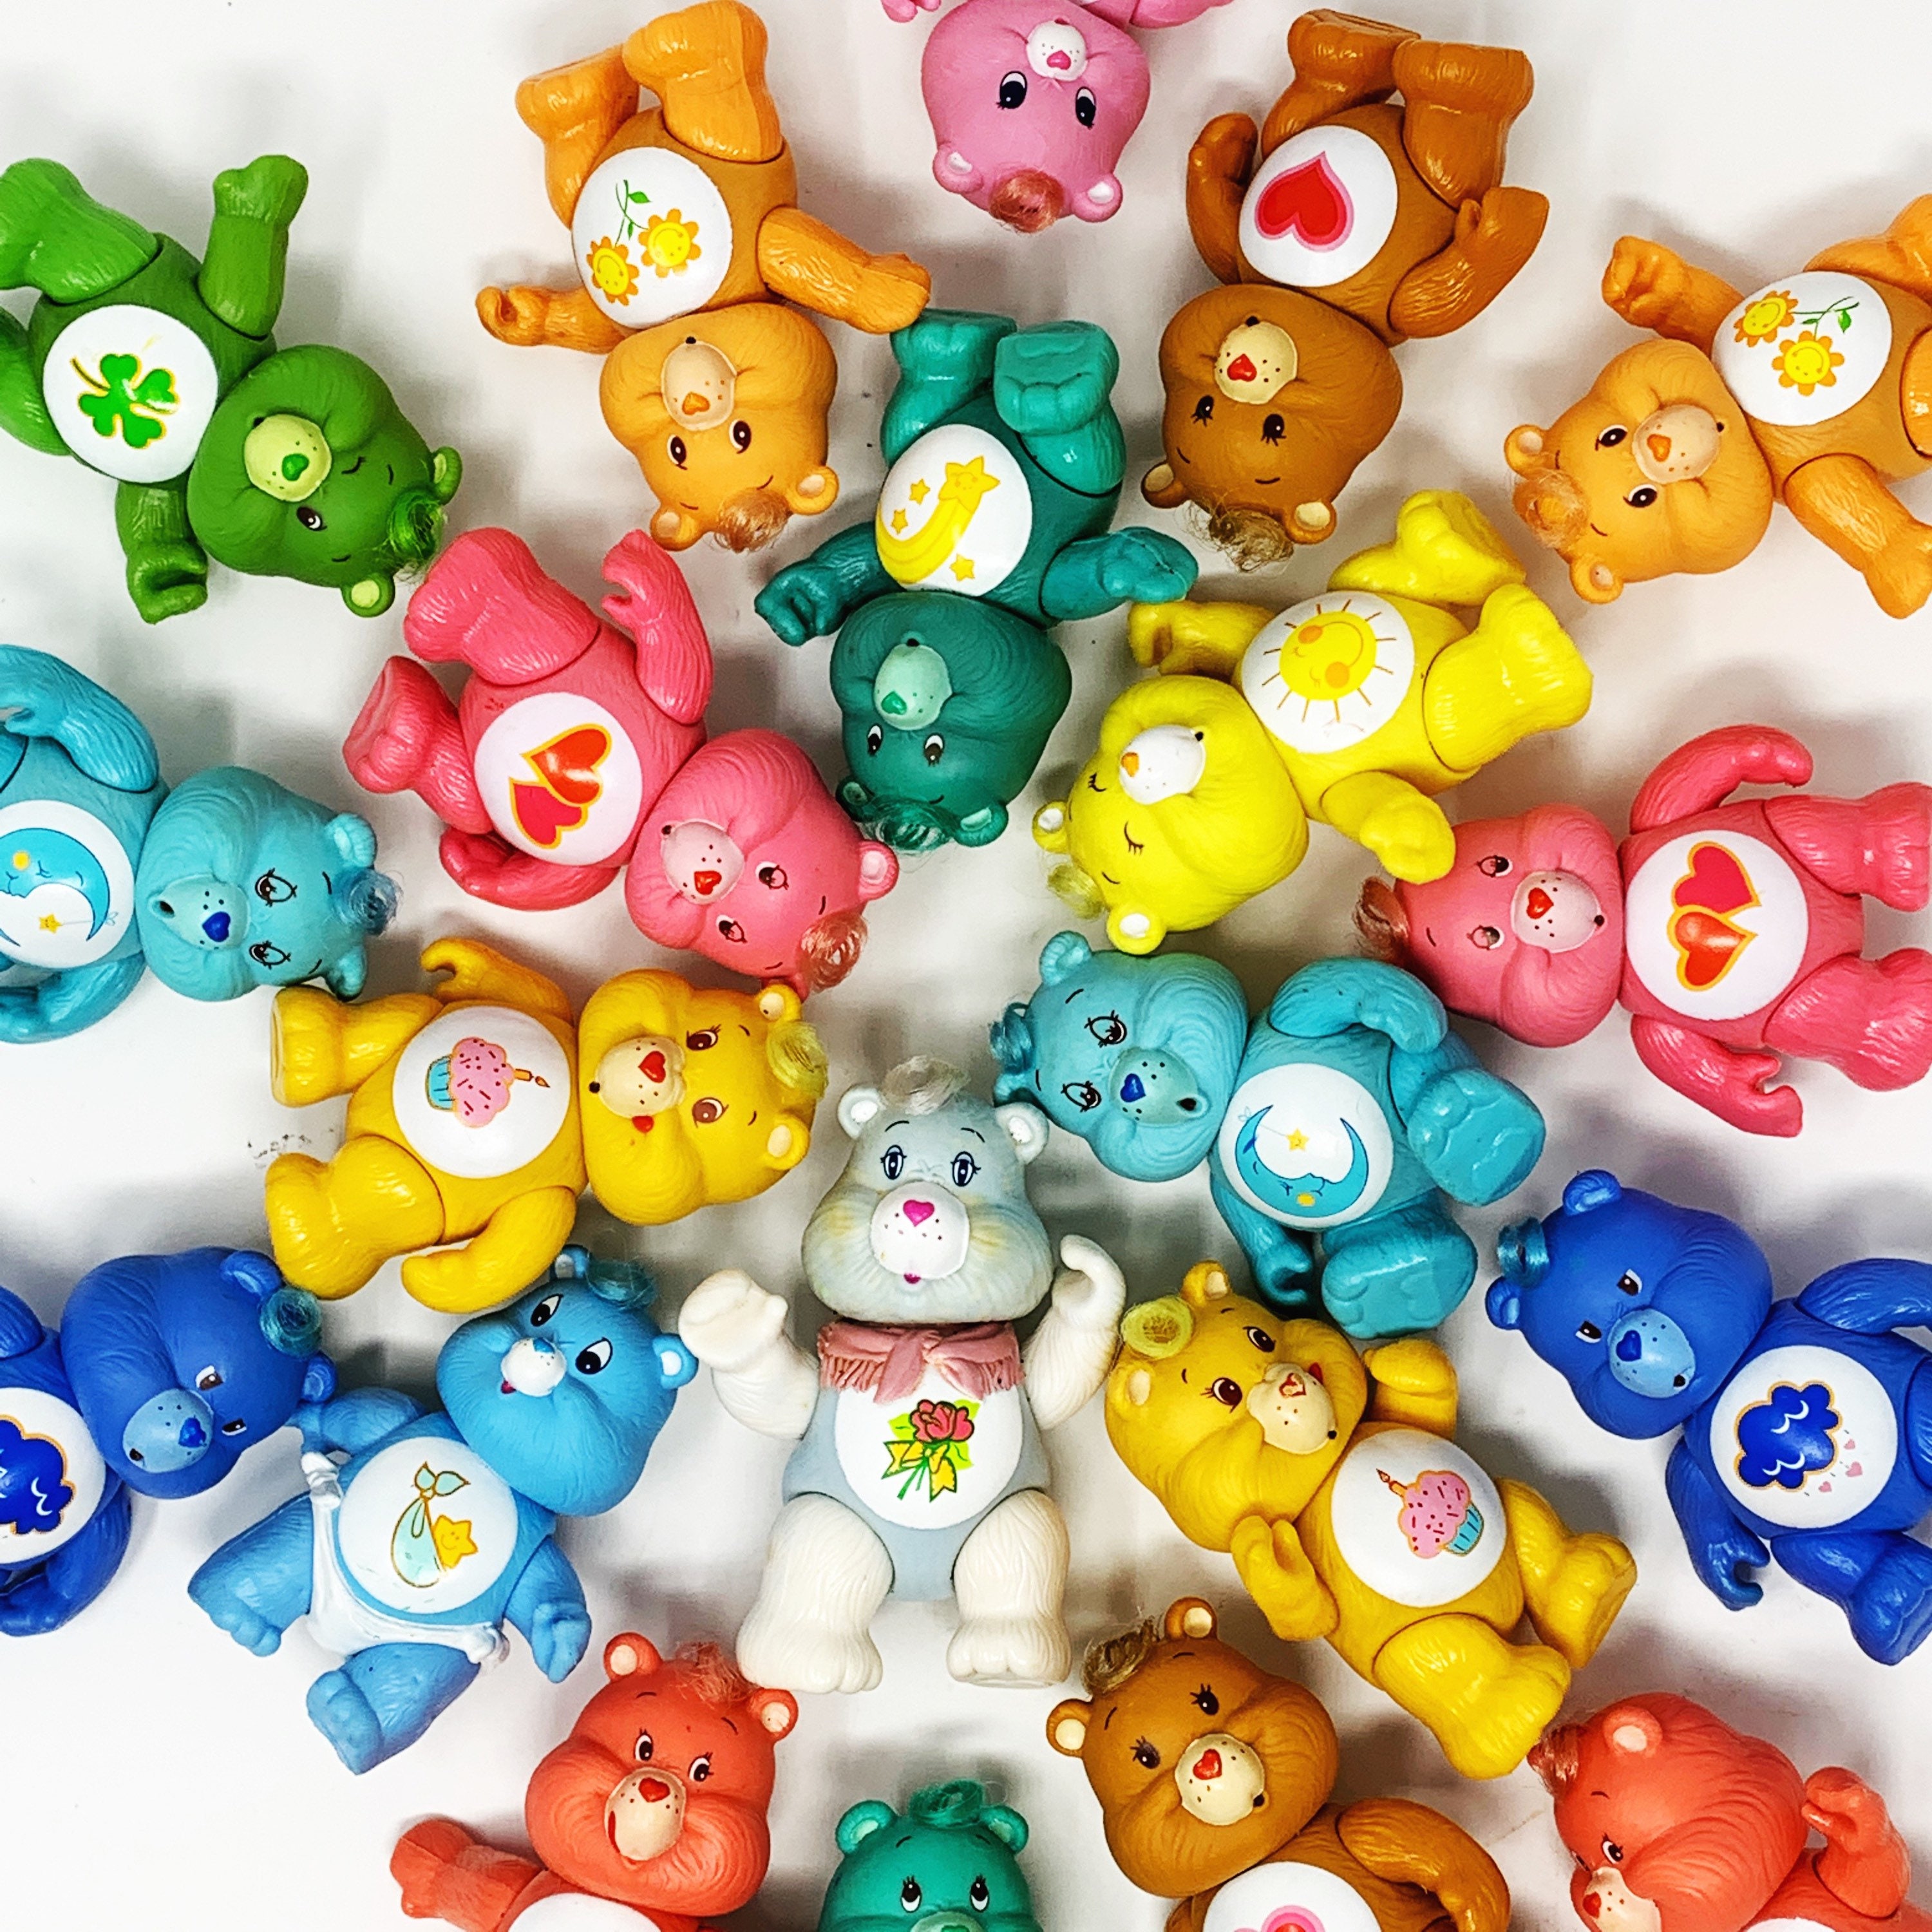 Care Bear Party Supplies Indiana Party Supply-Cake Toppers for